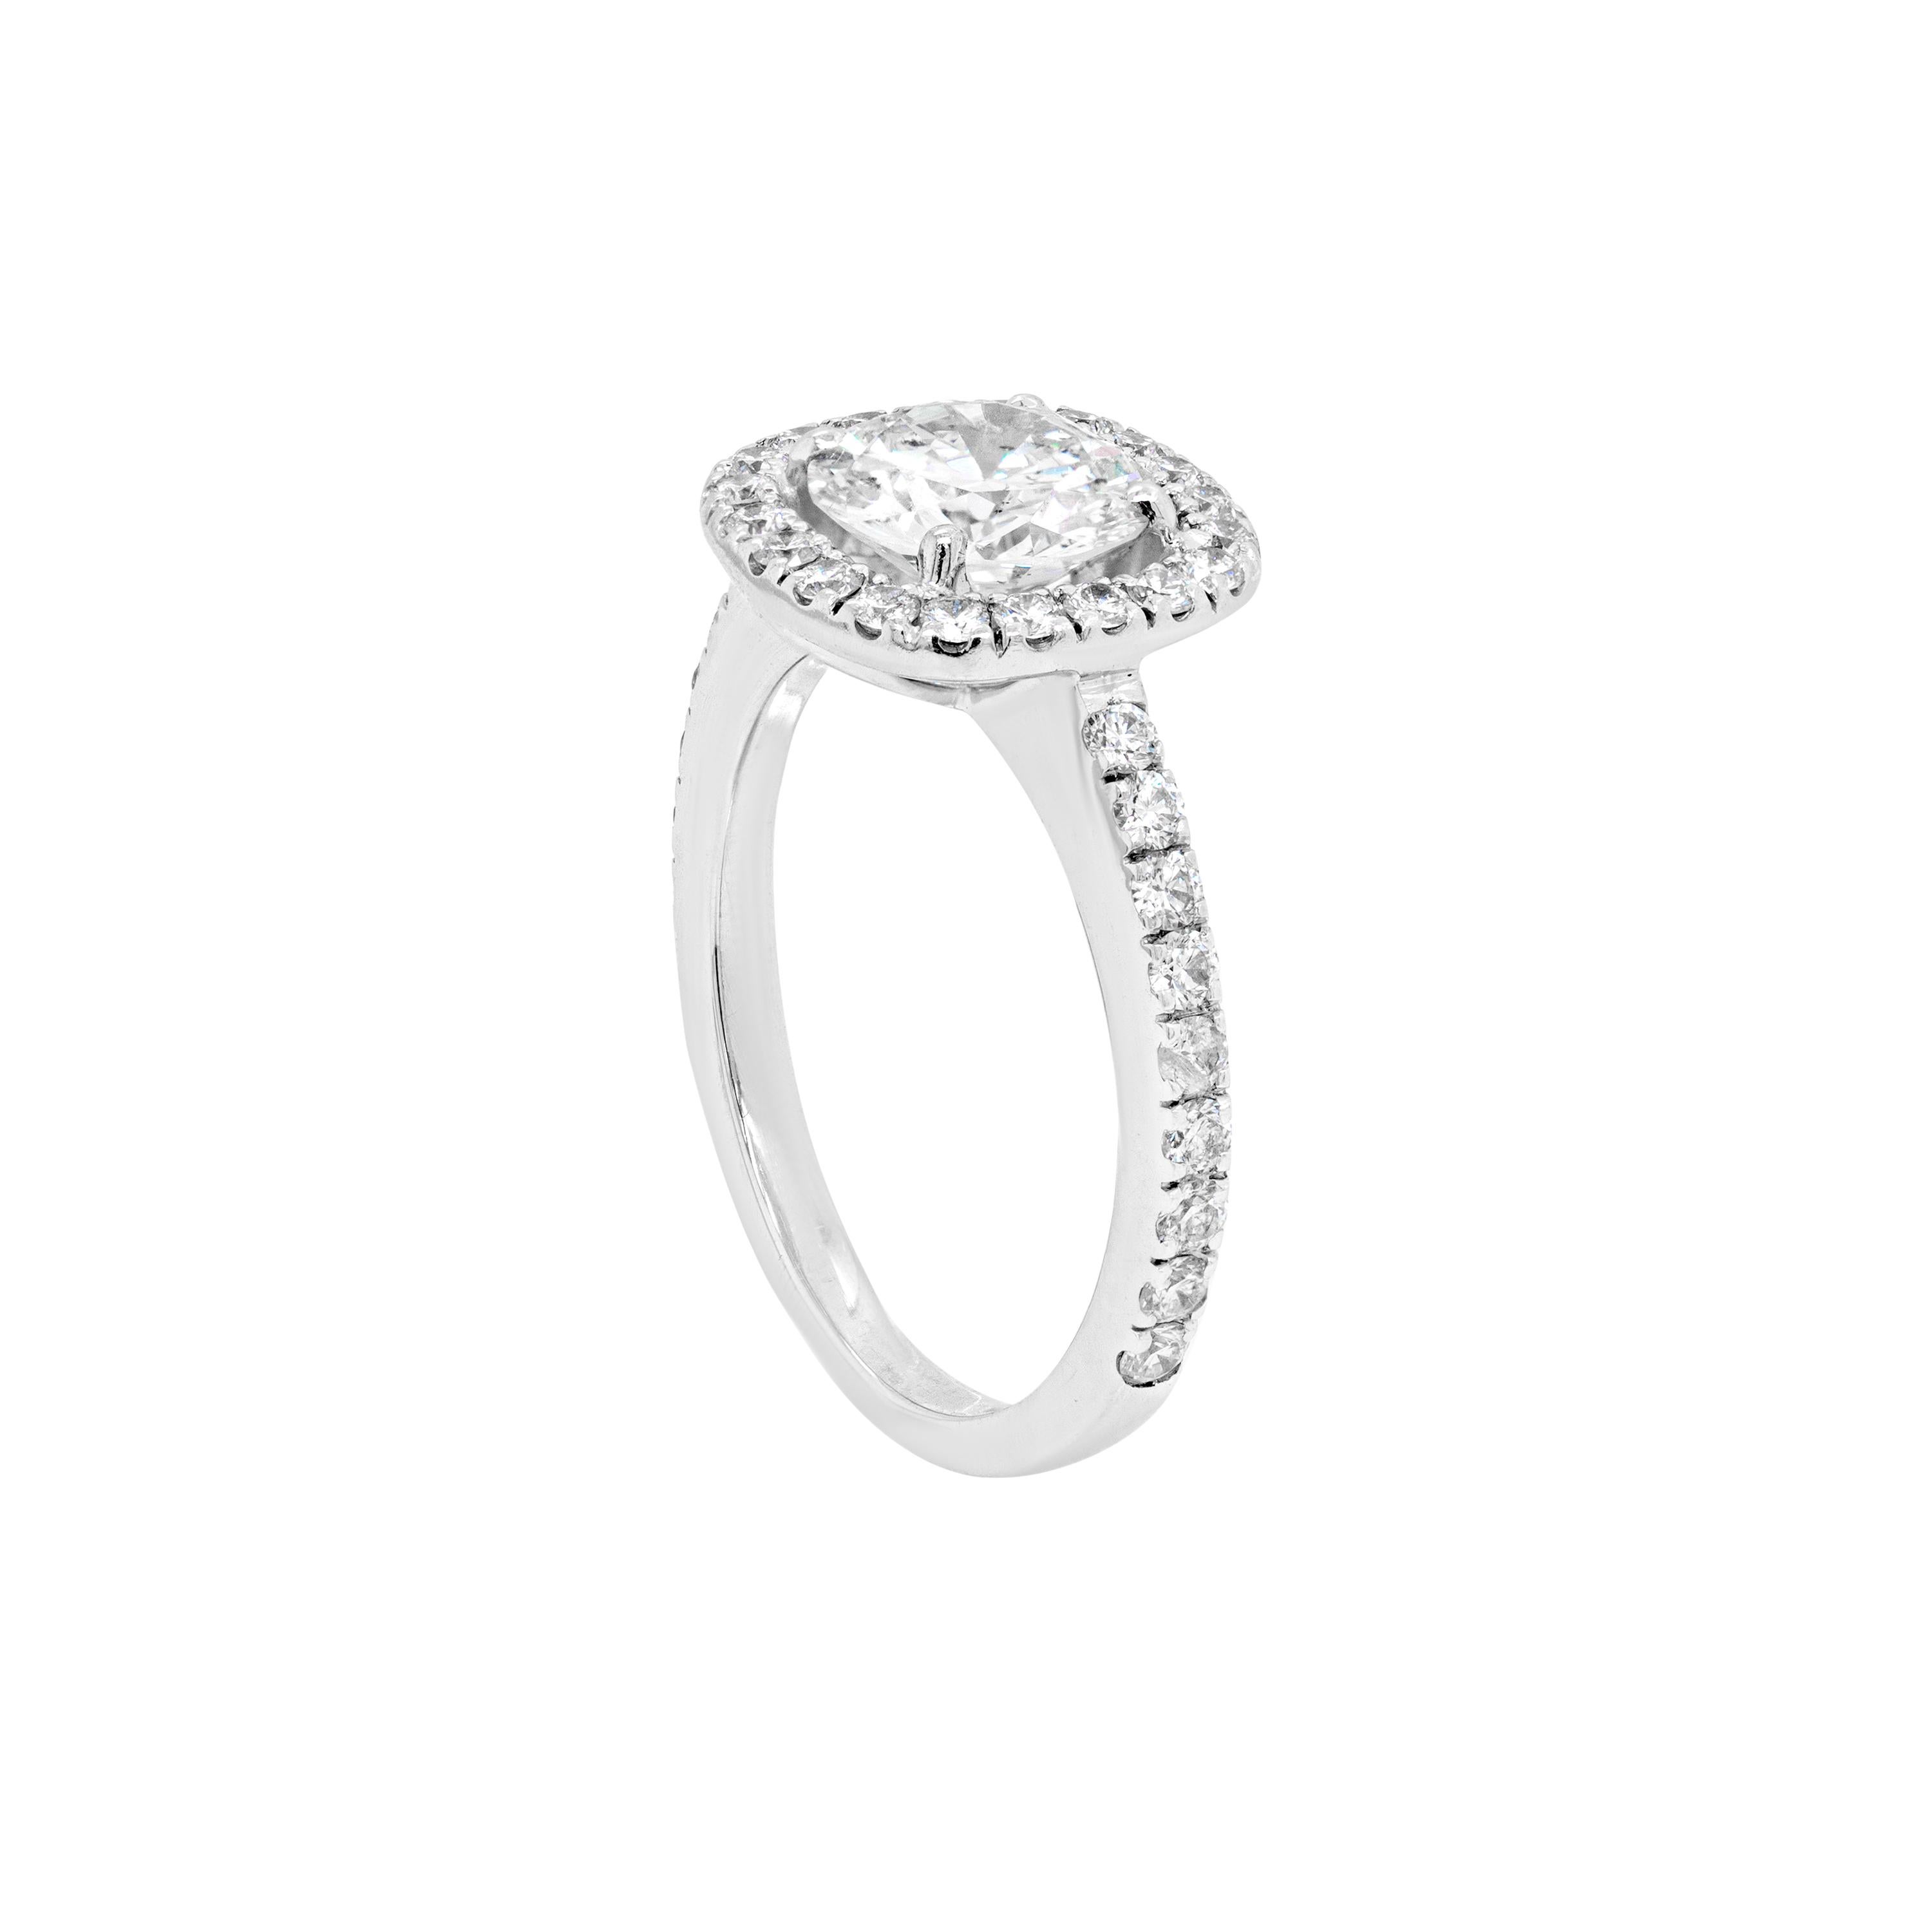 This absolutely gorgeous 18 carat white gold engagement ring features a round brilliant cut diamond weighing 1.04ct, certified 'H' in colour and 'Si1' in clarity. The beautiful stone is surrounded by a halo of 20 round brilliant cut diamonds to